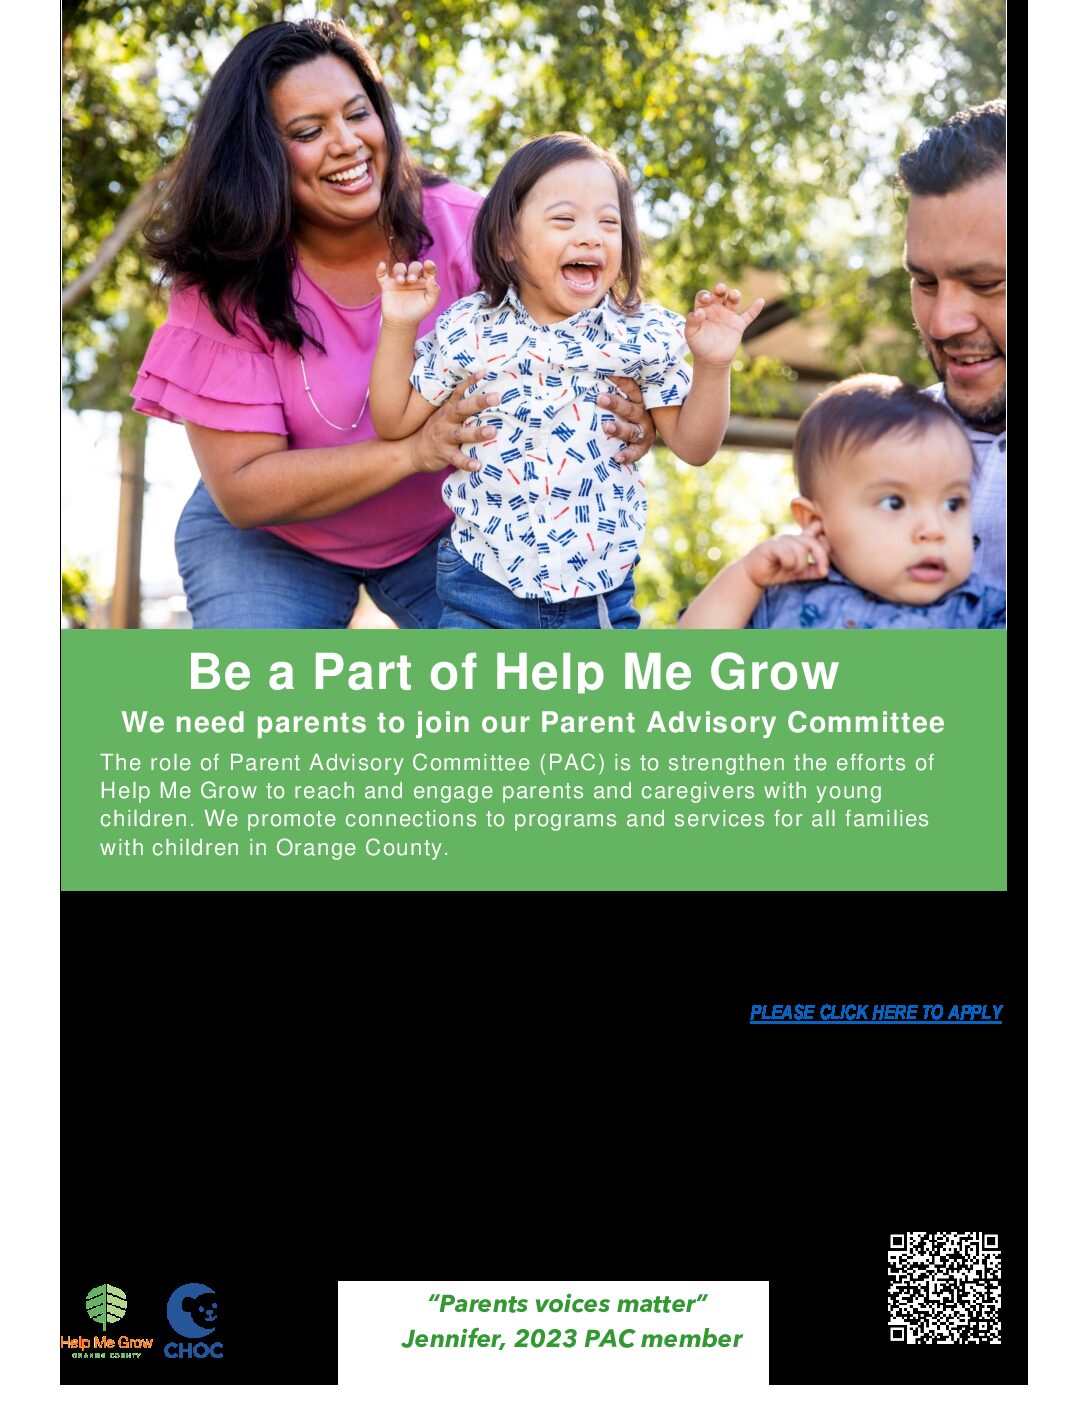 Help Me Grow seeks parents to join local Parent Advisory Committee